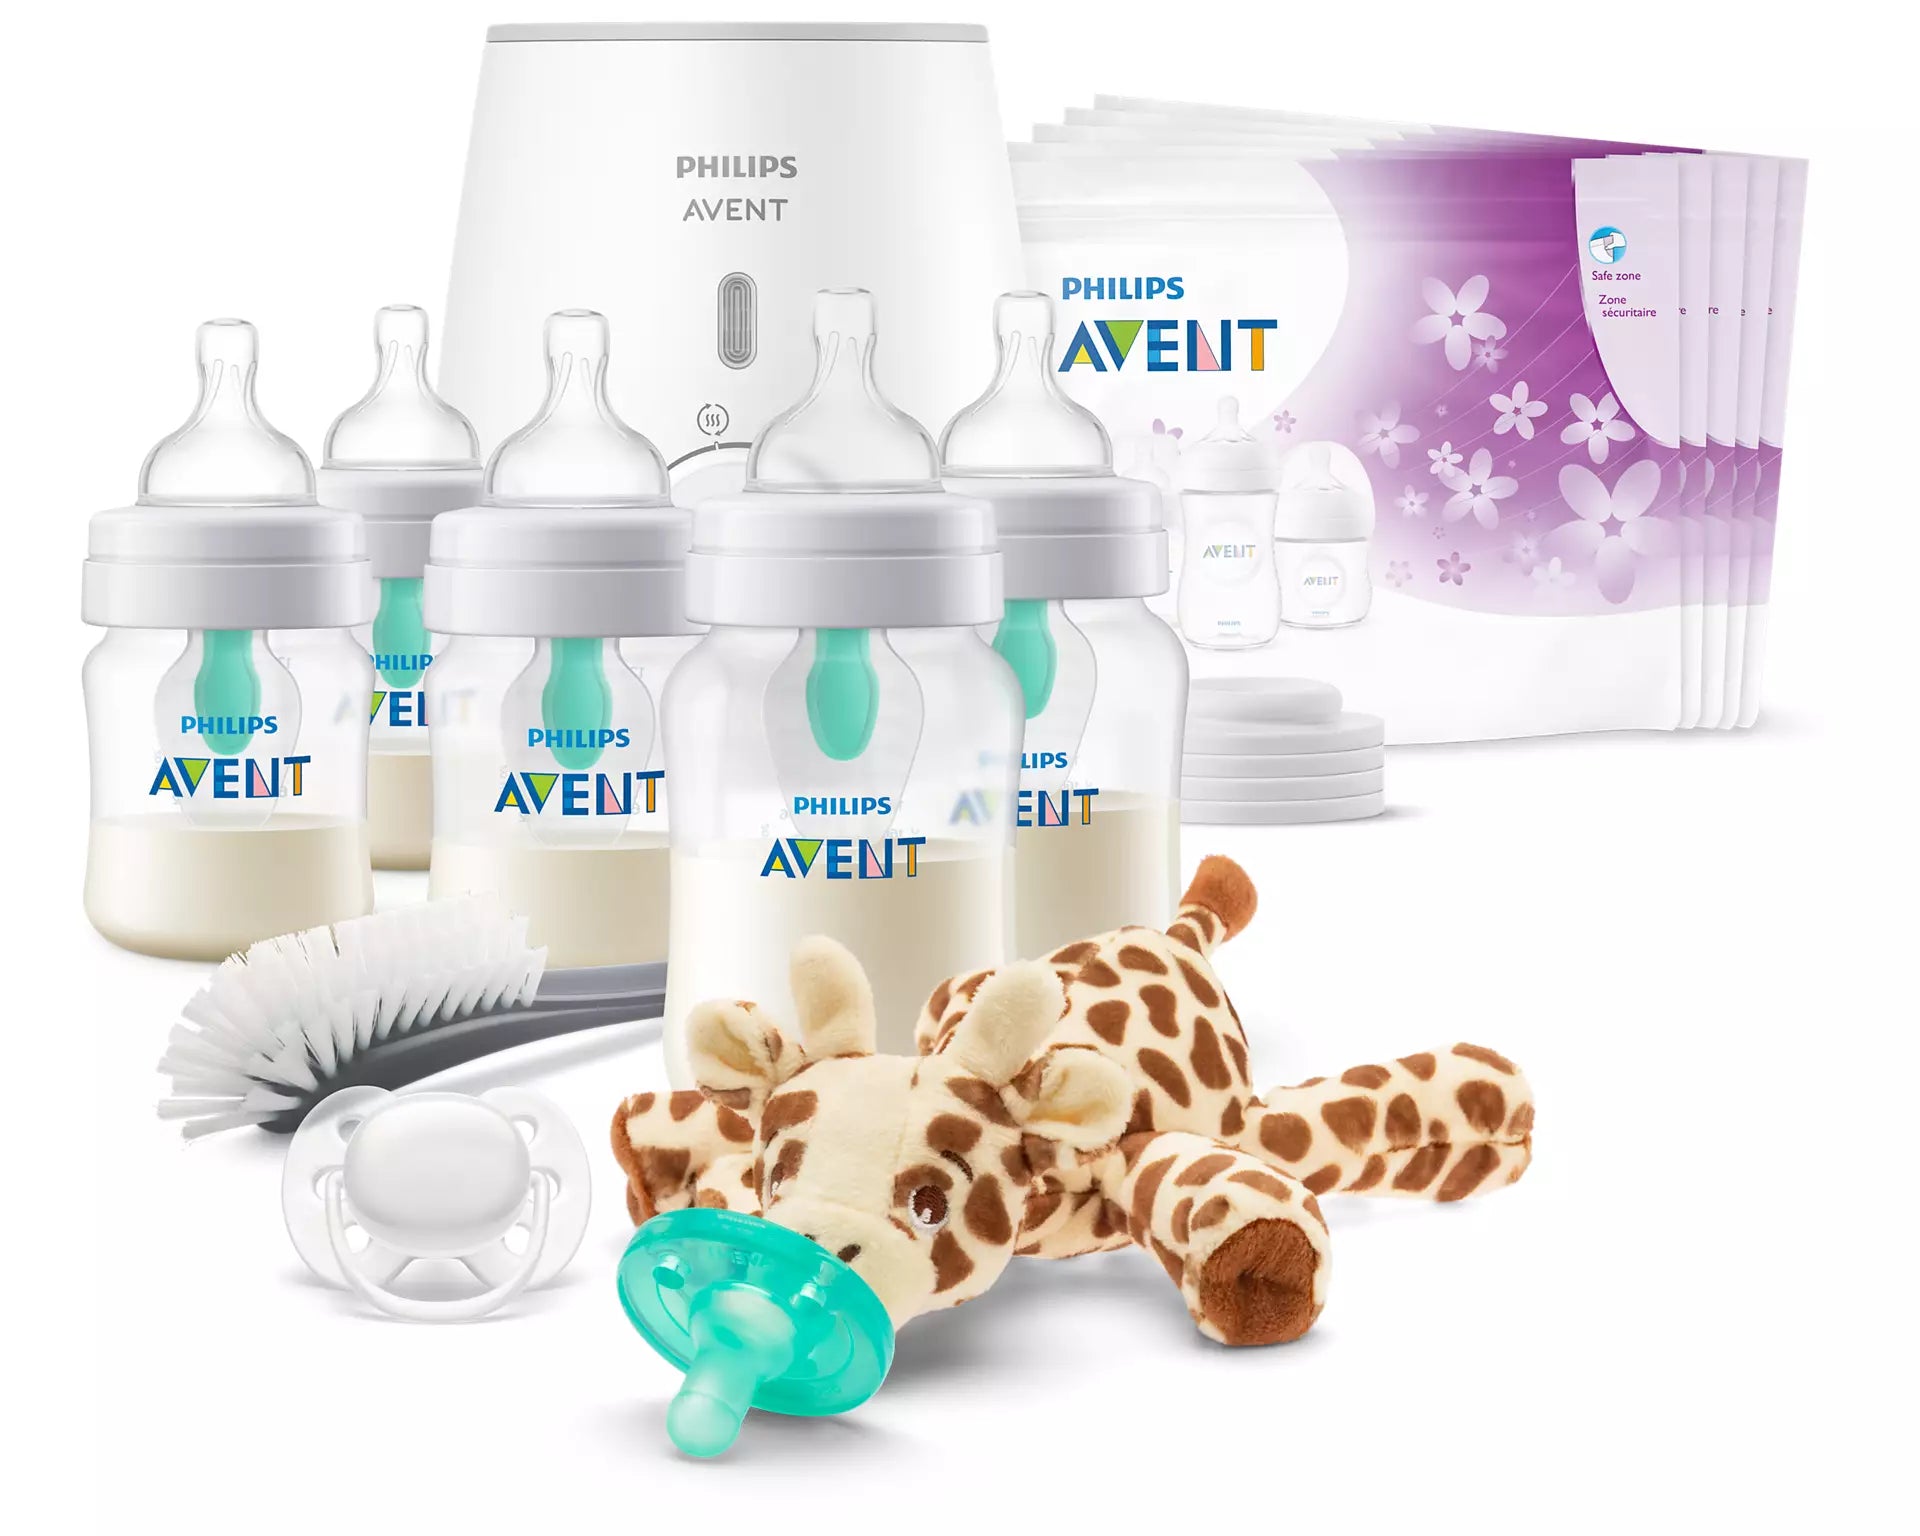 Avent Anti-Colic Bottle Gift Sets 19 piece